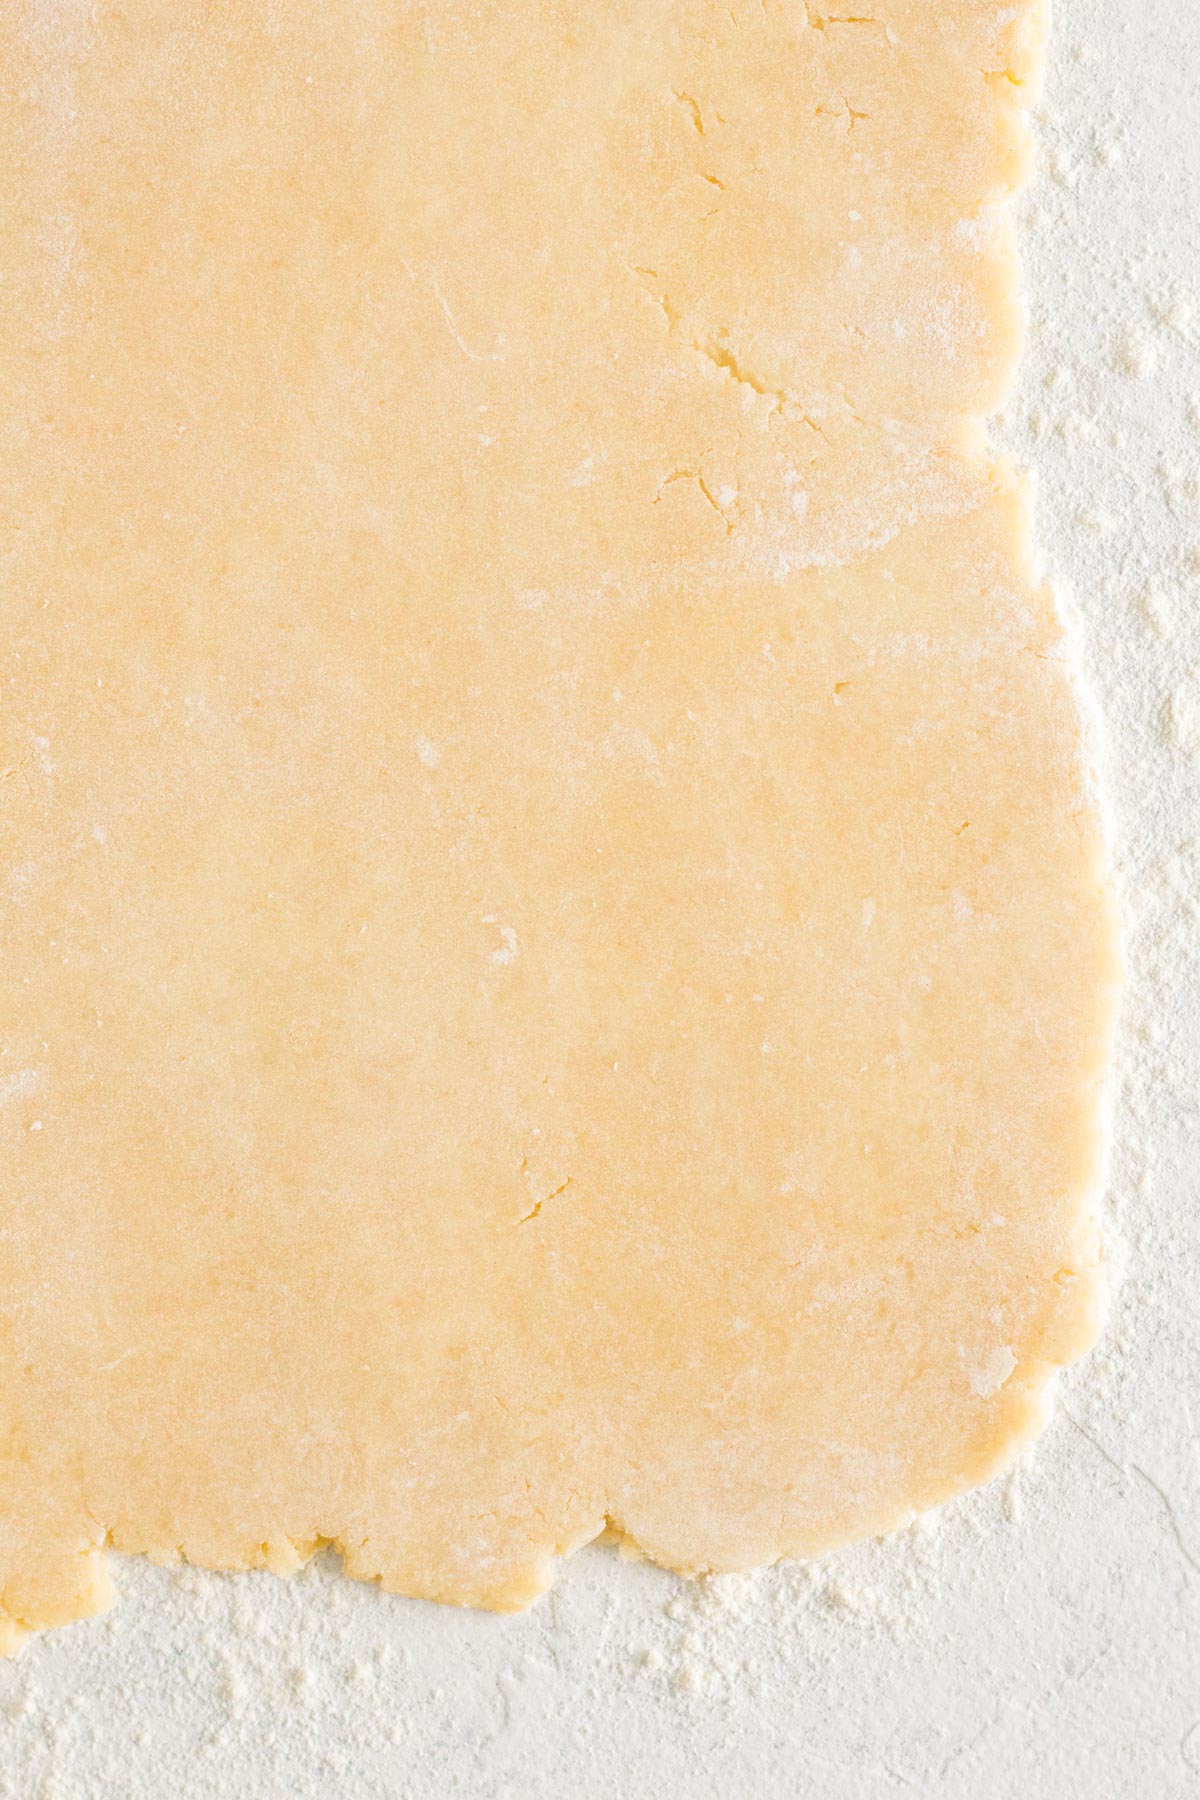 Rolled out pie crust dough on a floured white surface.